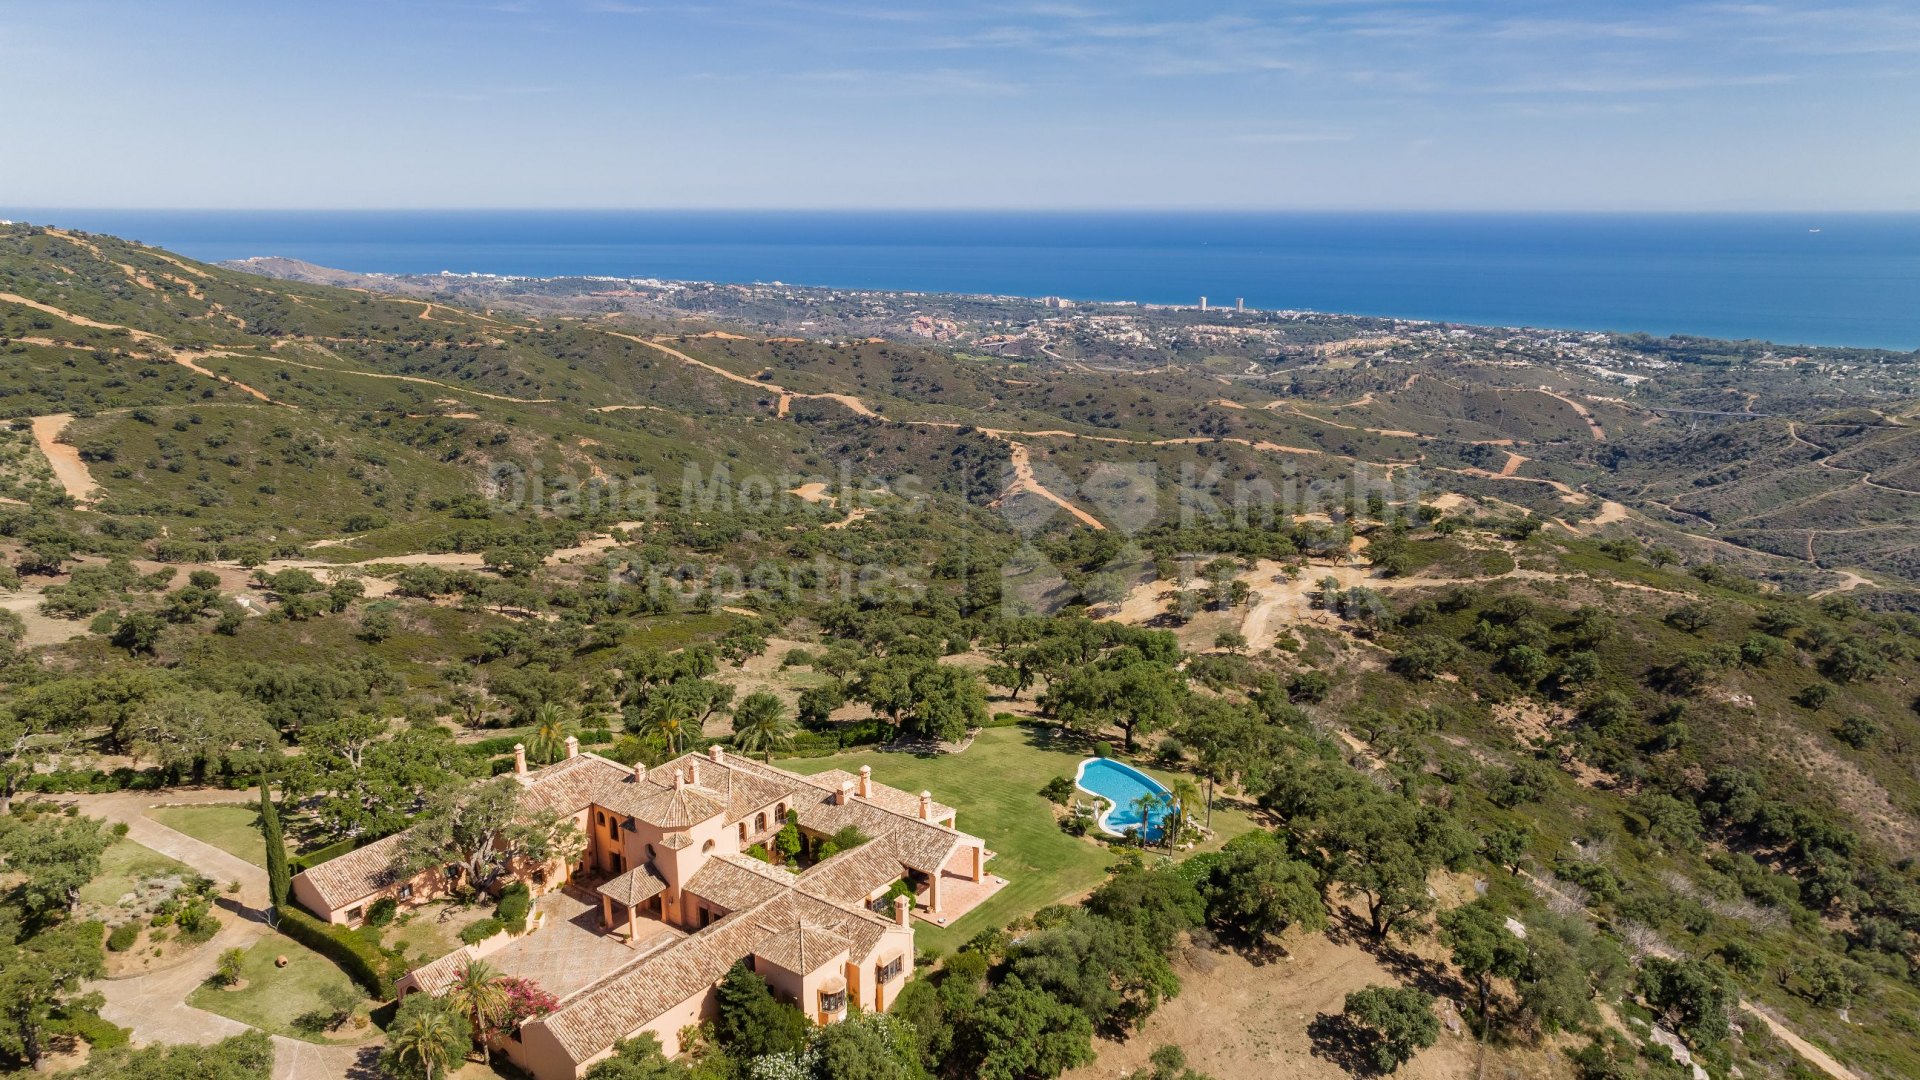 La Mairena, Classical style villa with breathtaking views on large plot